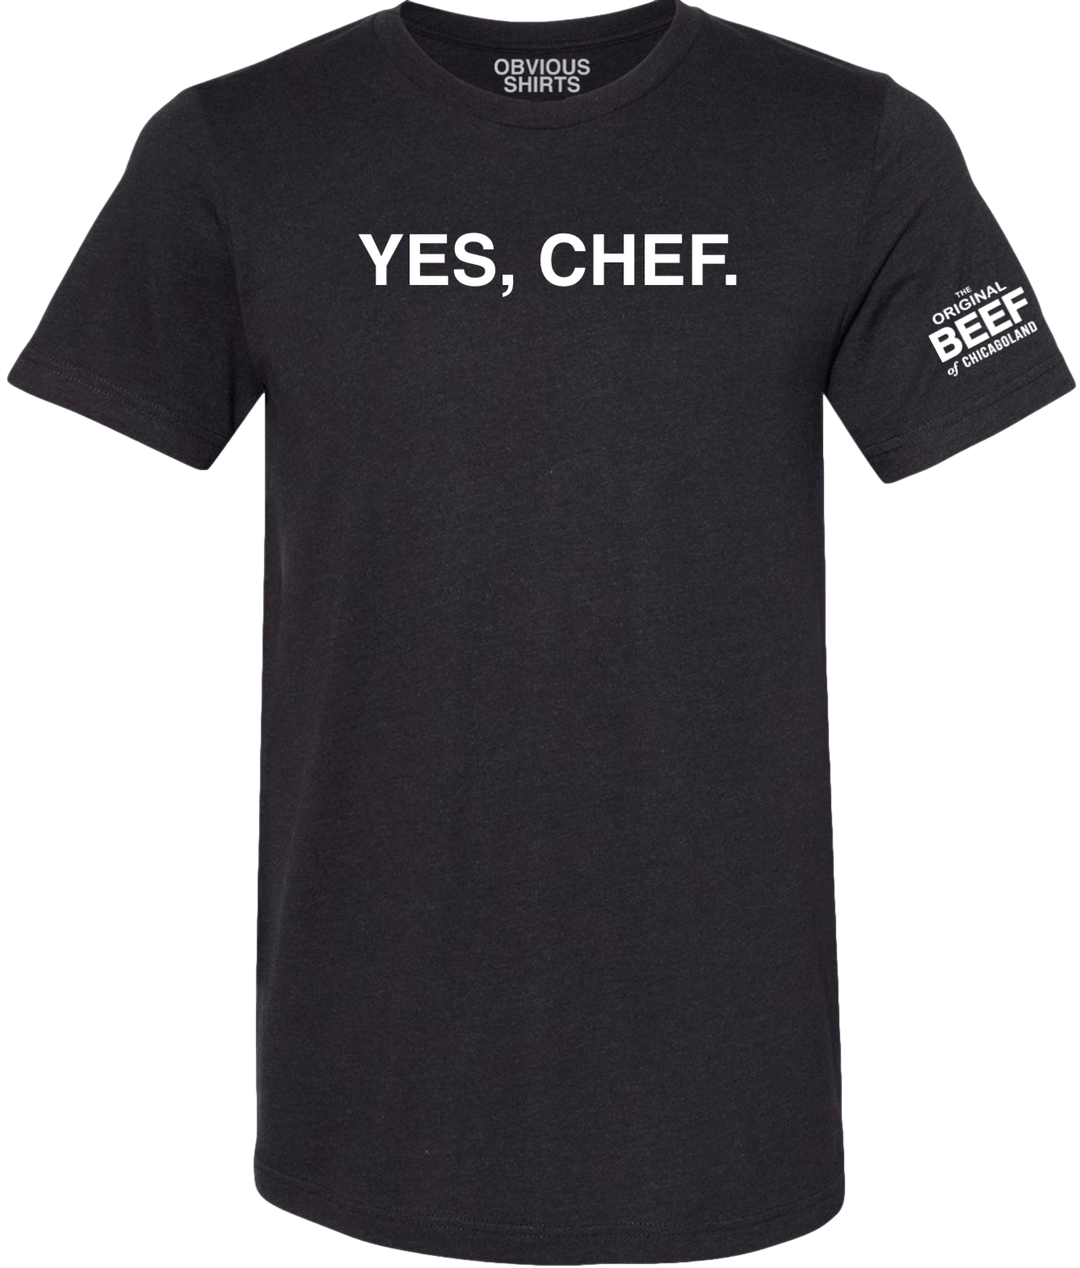 YES, CHEF. | OBVIOUS SHIRTS.